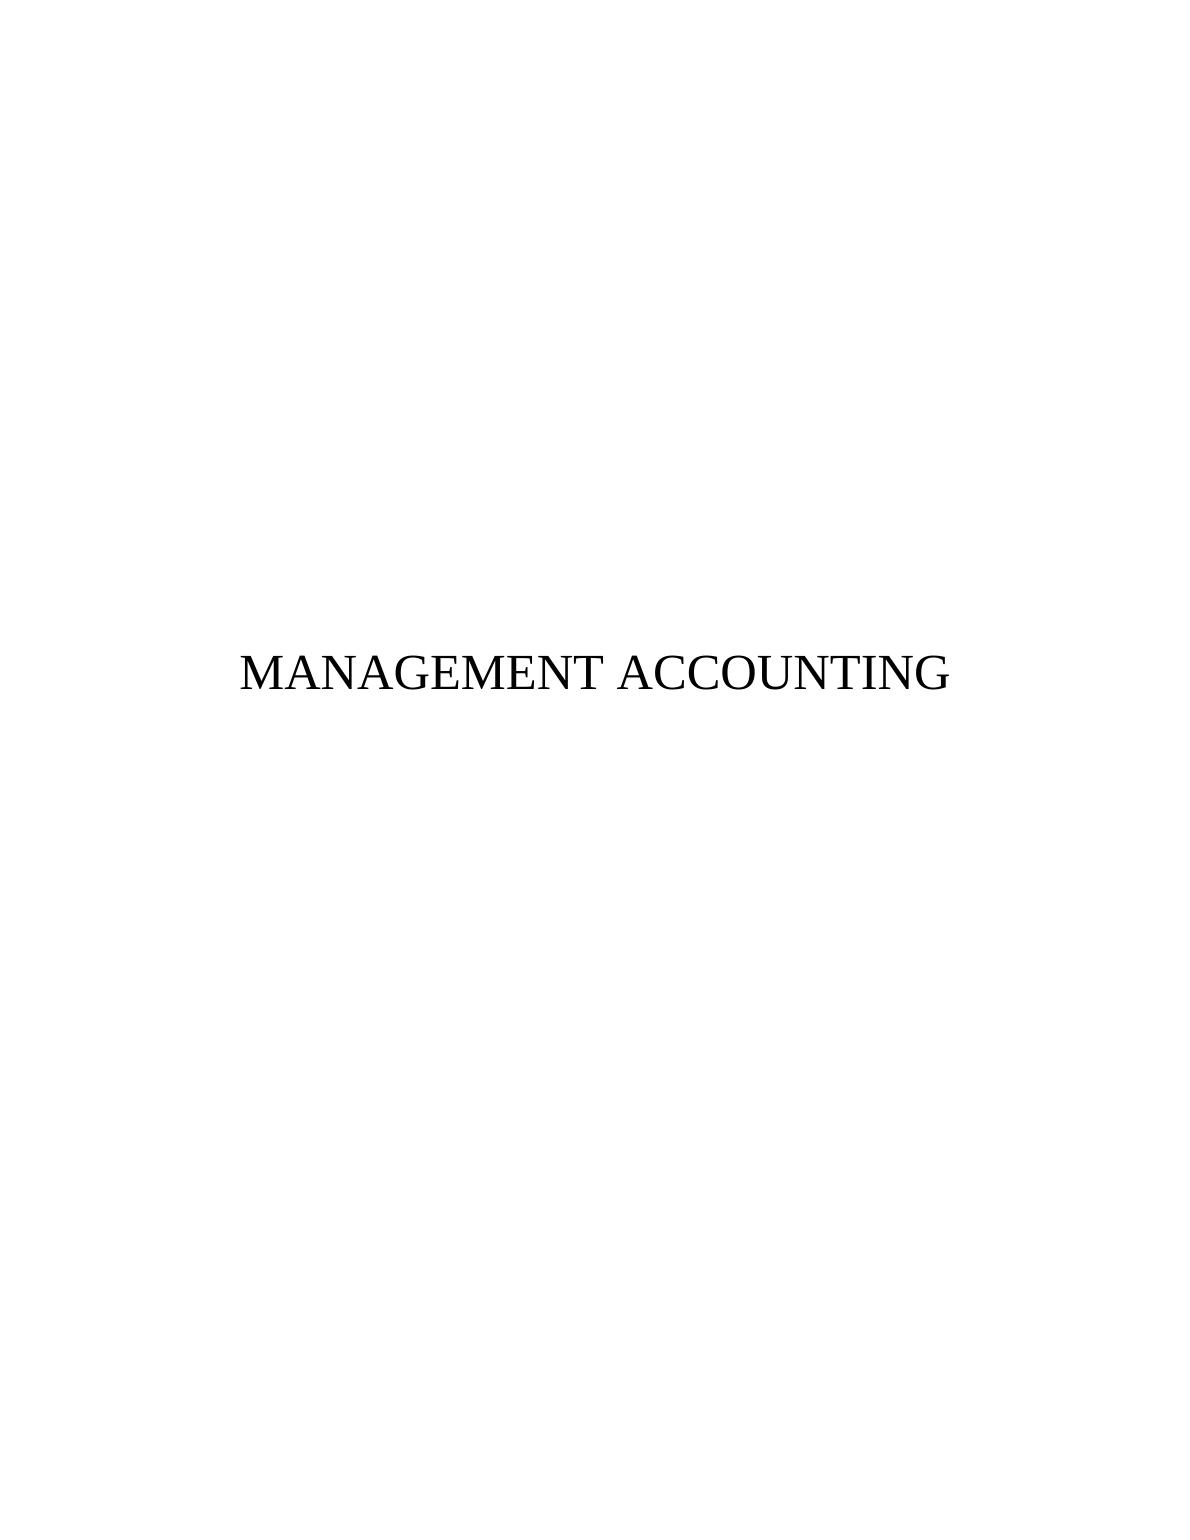 UNIT 2 Assignment on Management Accounting_1